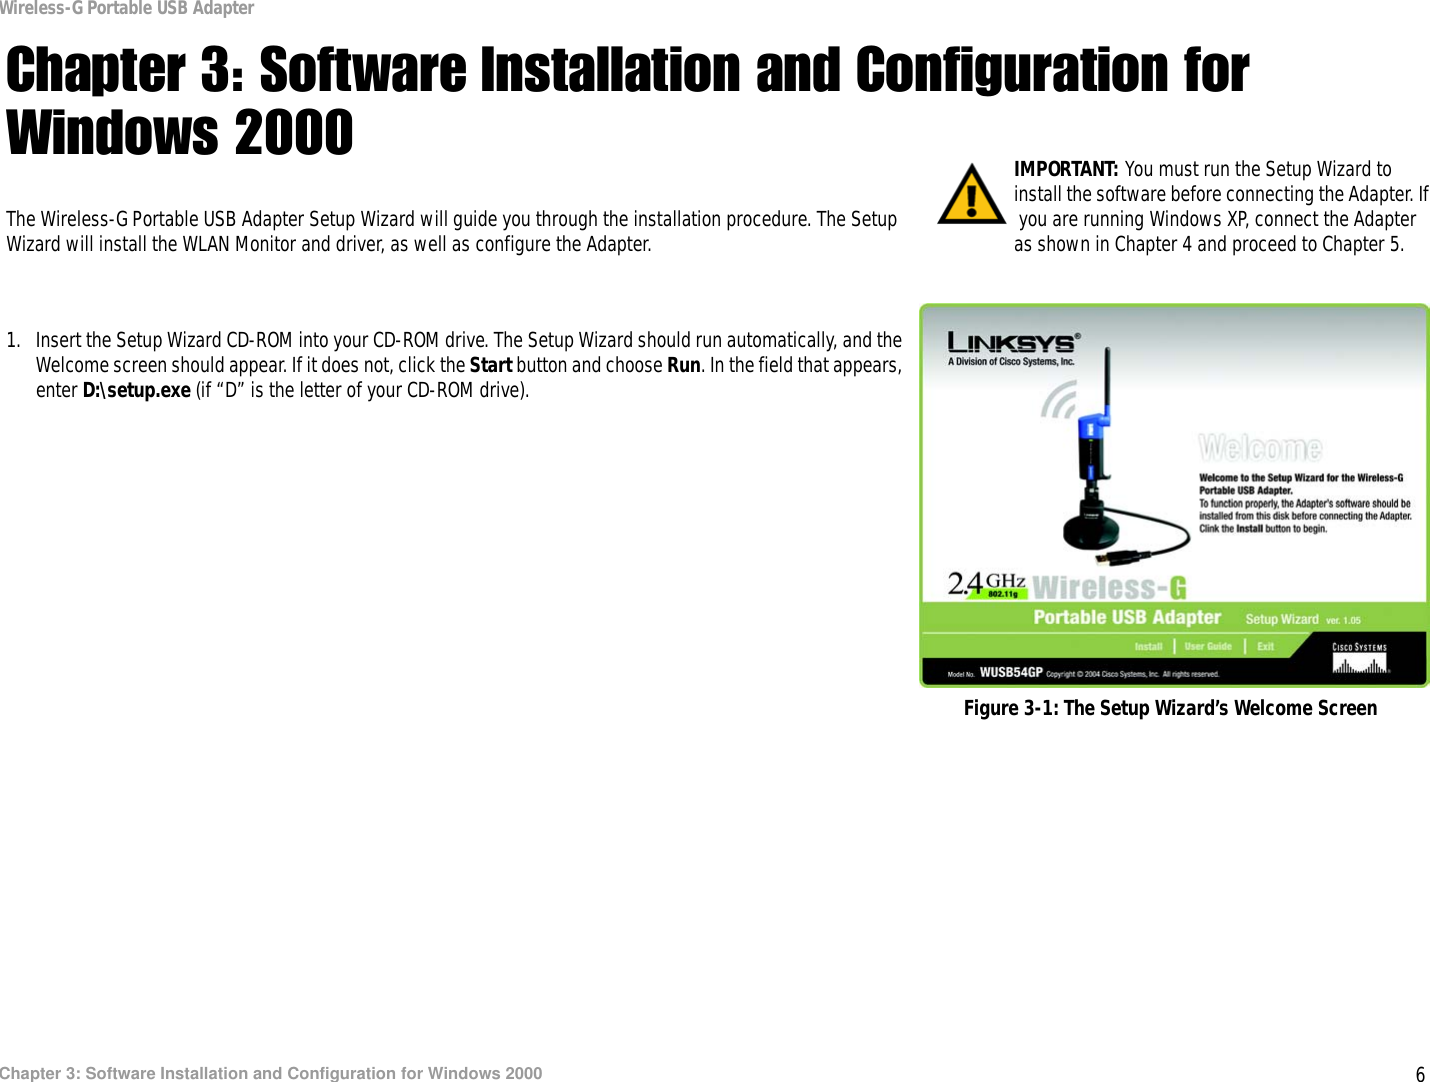 6Chapter 3: Software Installation and Configuration for Windows 2000Wireless-G Portable USB AdapterChapter 3: Software Installation and Configuration for Windows 2000The Wireless-G Portable USB Adapter Setup Wizard will guide you through the installation procedure. The Setup Wizard will install the WLAN Monitor and driver, as well as configure the Adapter.1. Insert the Setup Wizard CD-ROM into your CD-ROM drive. The Setup Wizard should run automatically, and the Welcome screen should appear. If it does not, click the Start button and choose Run. In the field that appears, enter D:\setup.exe (if “D” is the letter of your CD-ROM drive). IMPORTANT: You must run the Setup Wizard to install the software before connecting the Adapter. If you are running Windows XP, connect the Adapter as shown in Chapter 4 and proceed to Chapter 5.Figure 3-1: The Setup Wizard’s Welcome Screen